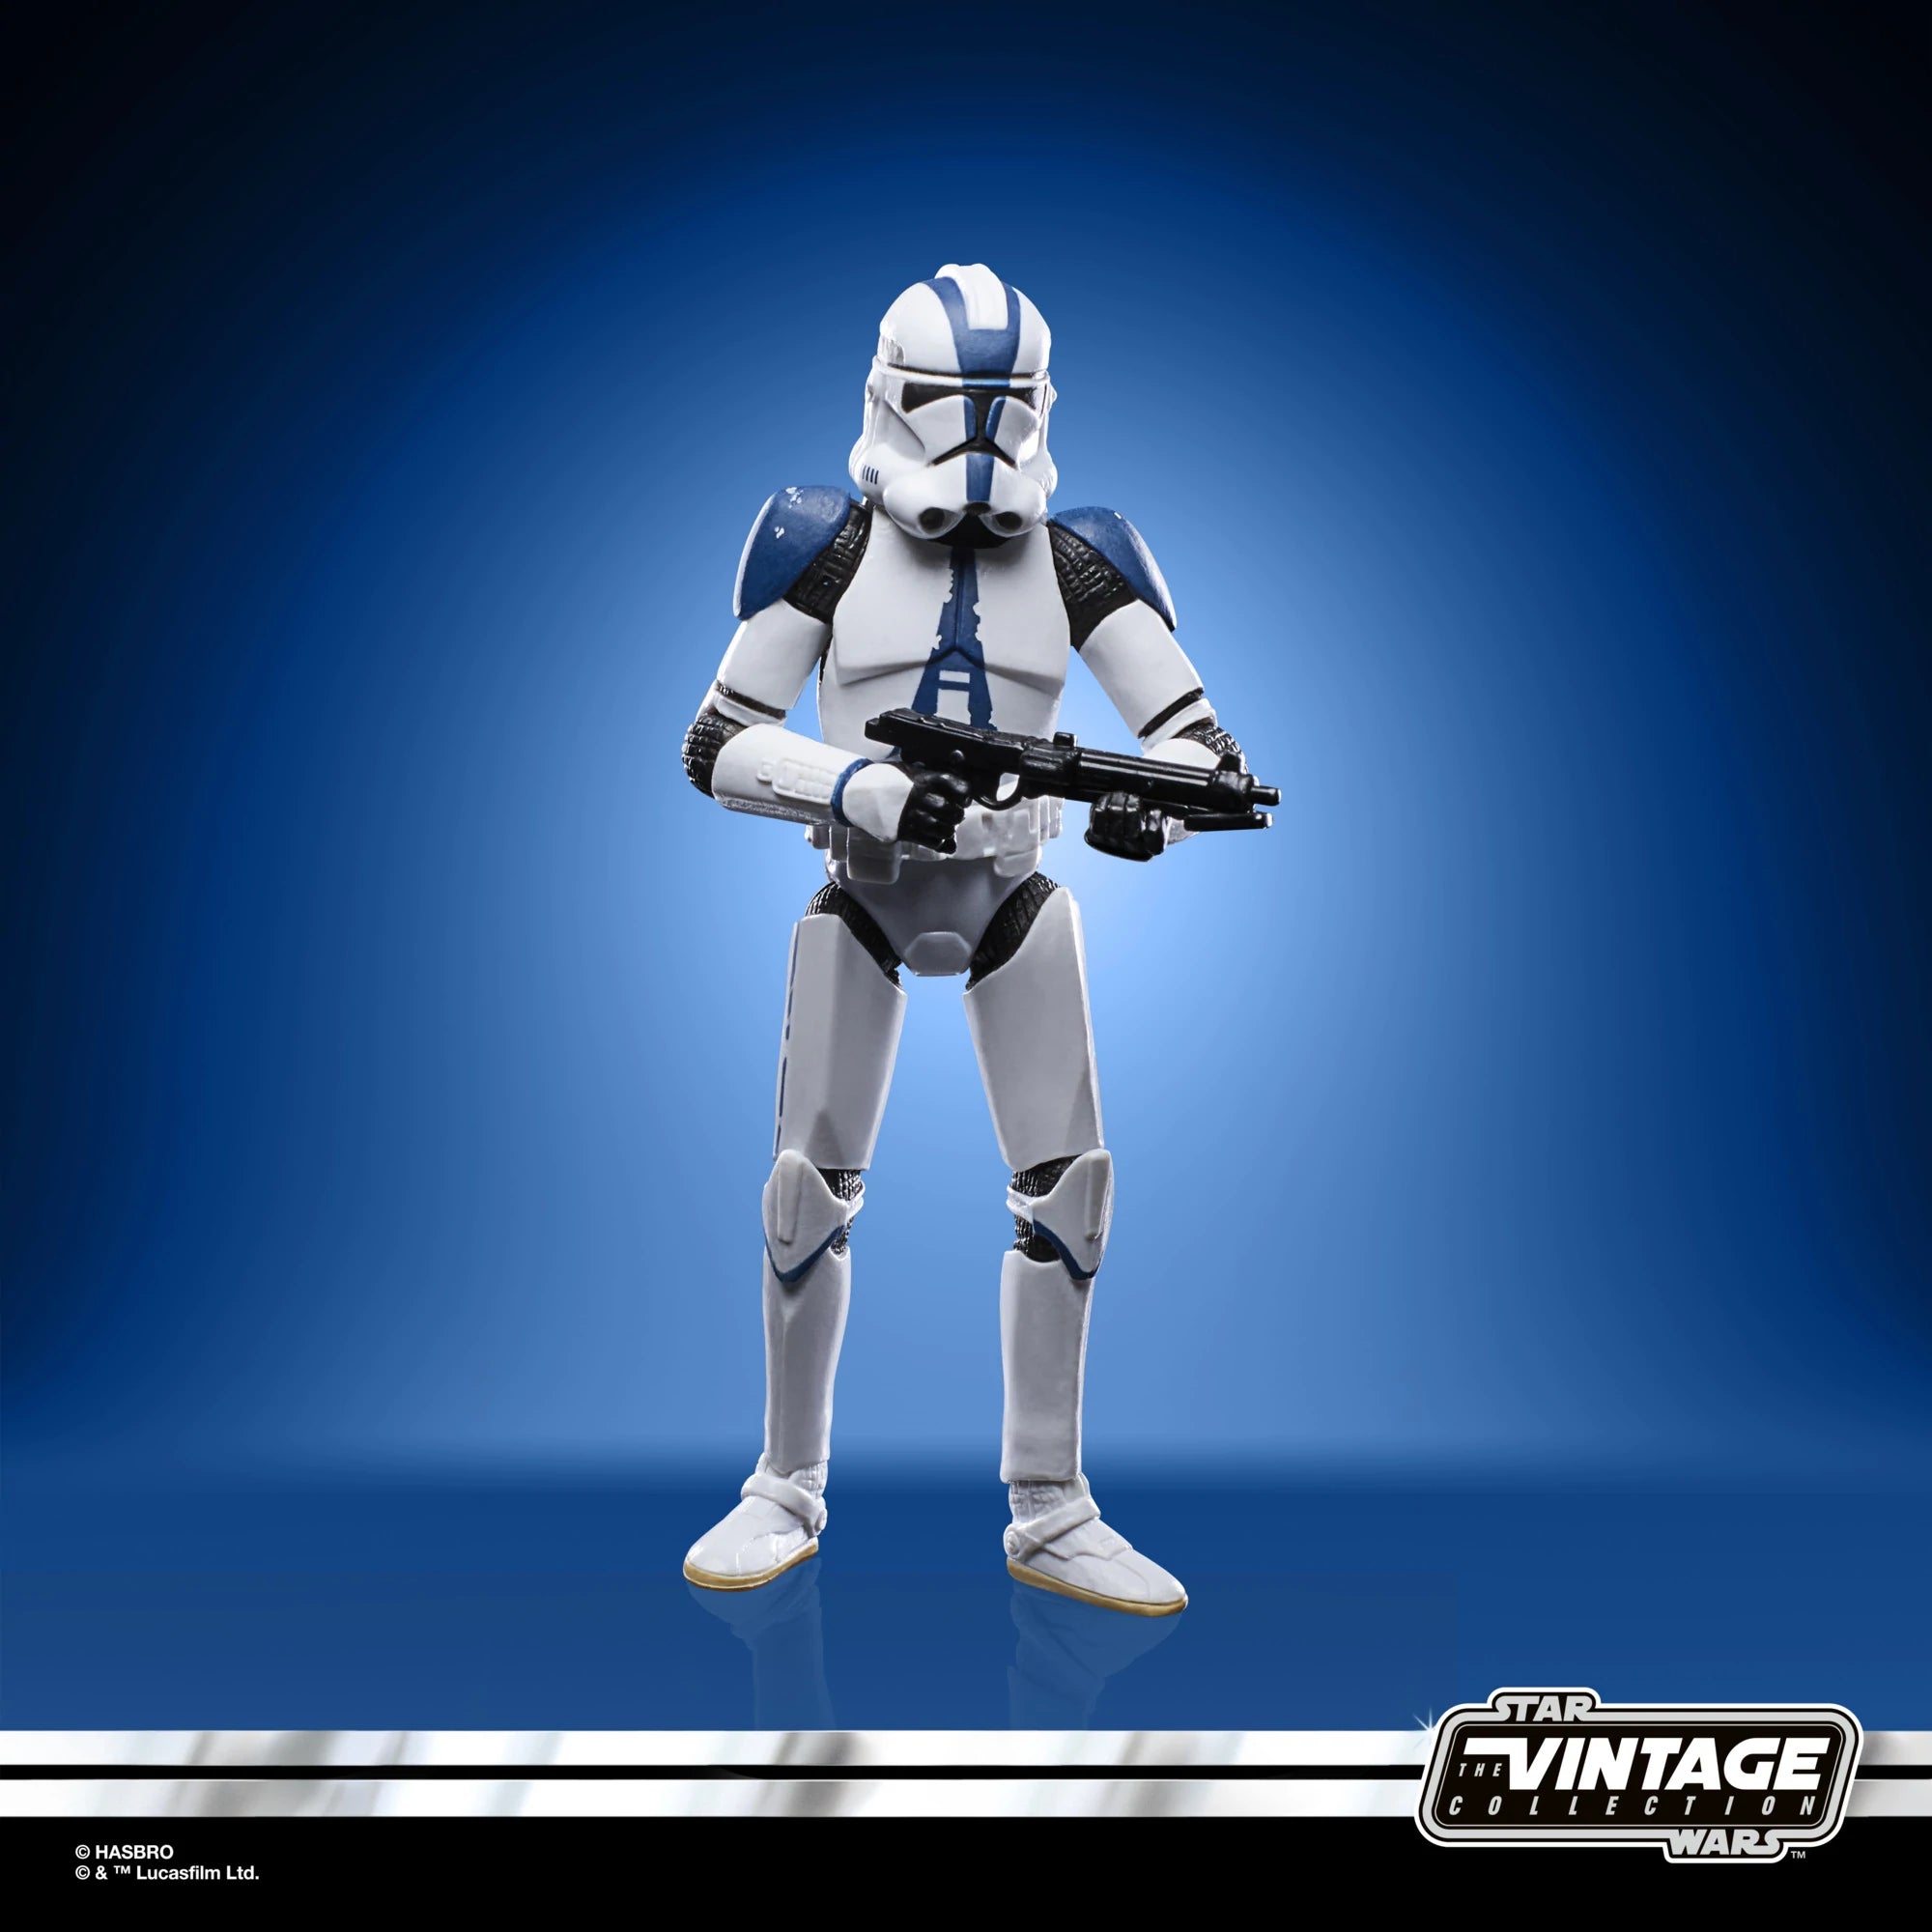 The Vintage Collection - The Clone Wars - 501st Clone Trooper